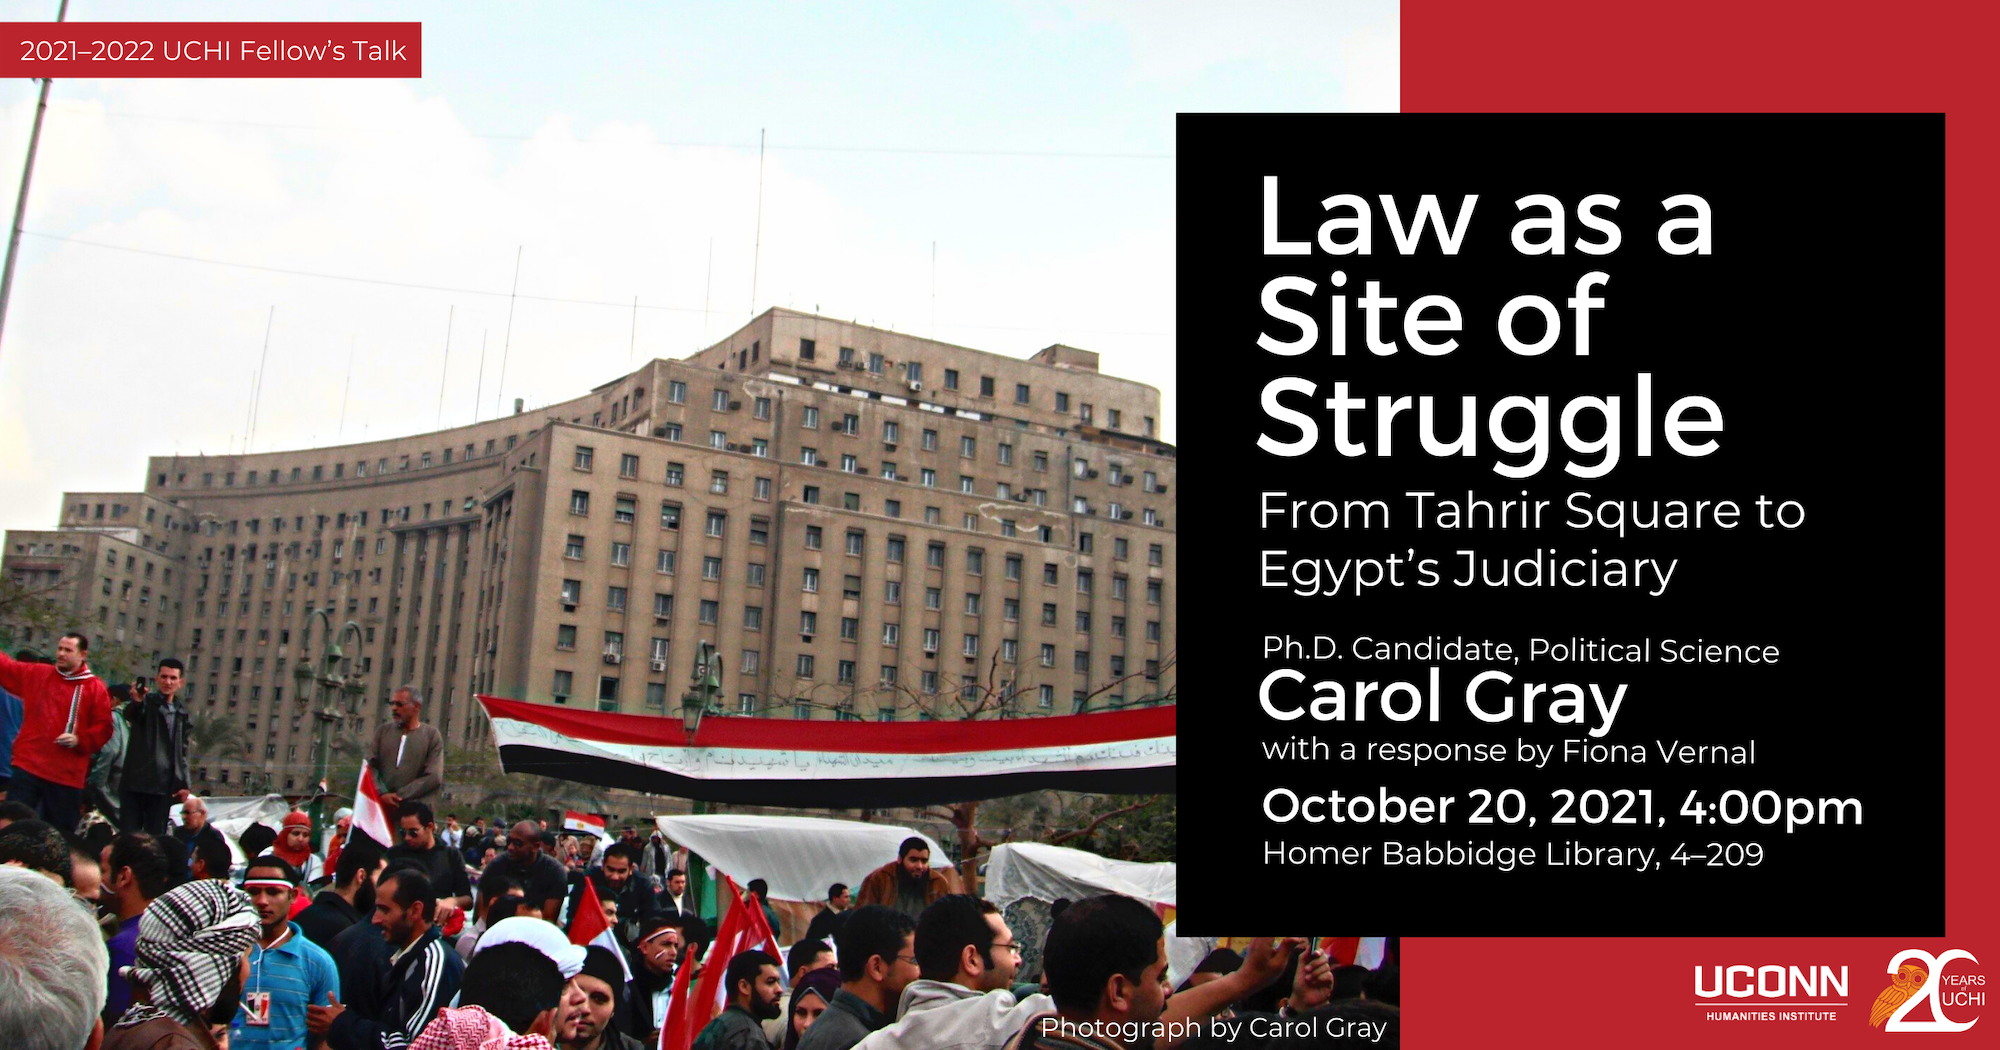 2021-22 UCHI fellow's Talk. Law as a site of struggle: From Tahrir Square to Egypt's Judiciary. PhD Candidate, Political Science Carol Gray. With a response by Fiona Vernal. October 20, 2021, 4:00pm. Homer Babbidge Library 4-209